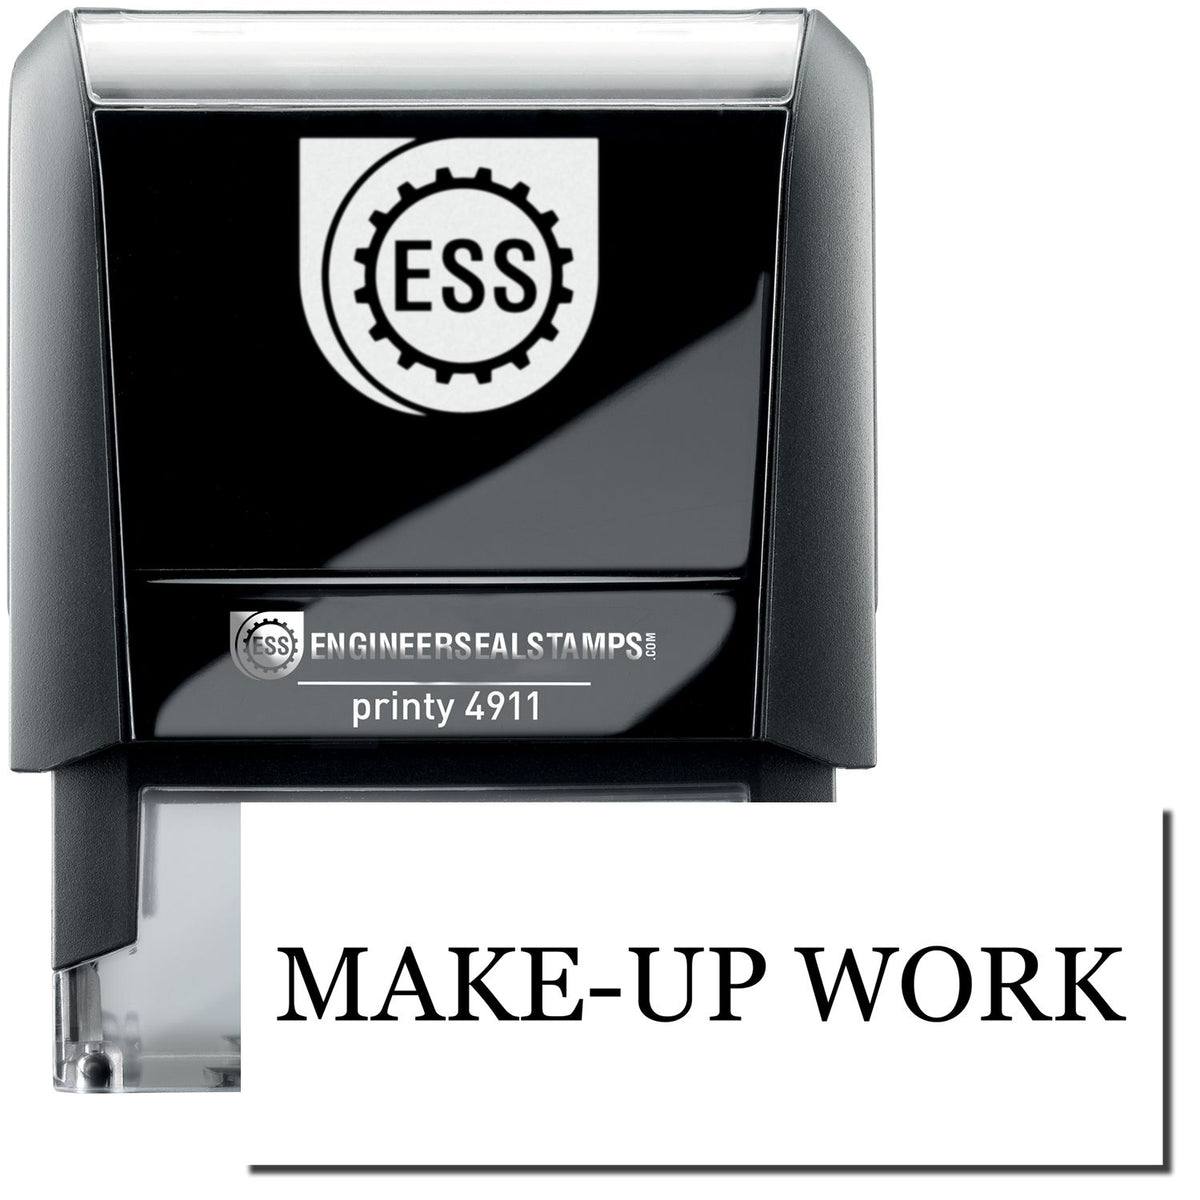 A self-inking stamp with a stamped image showing how the text &quot;MAKE-UP WORK&quot; is displayed after stamping.